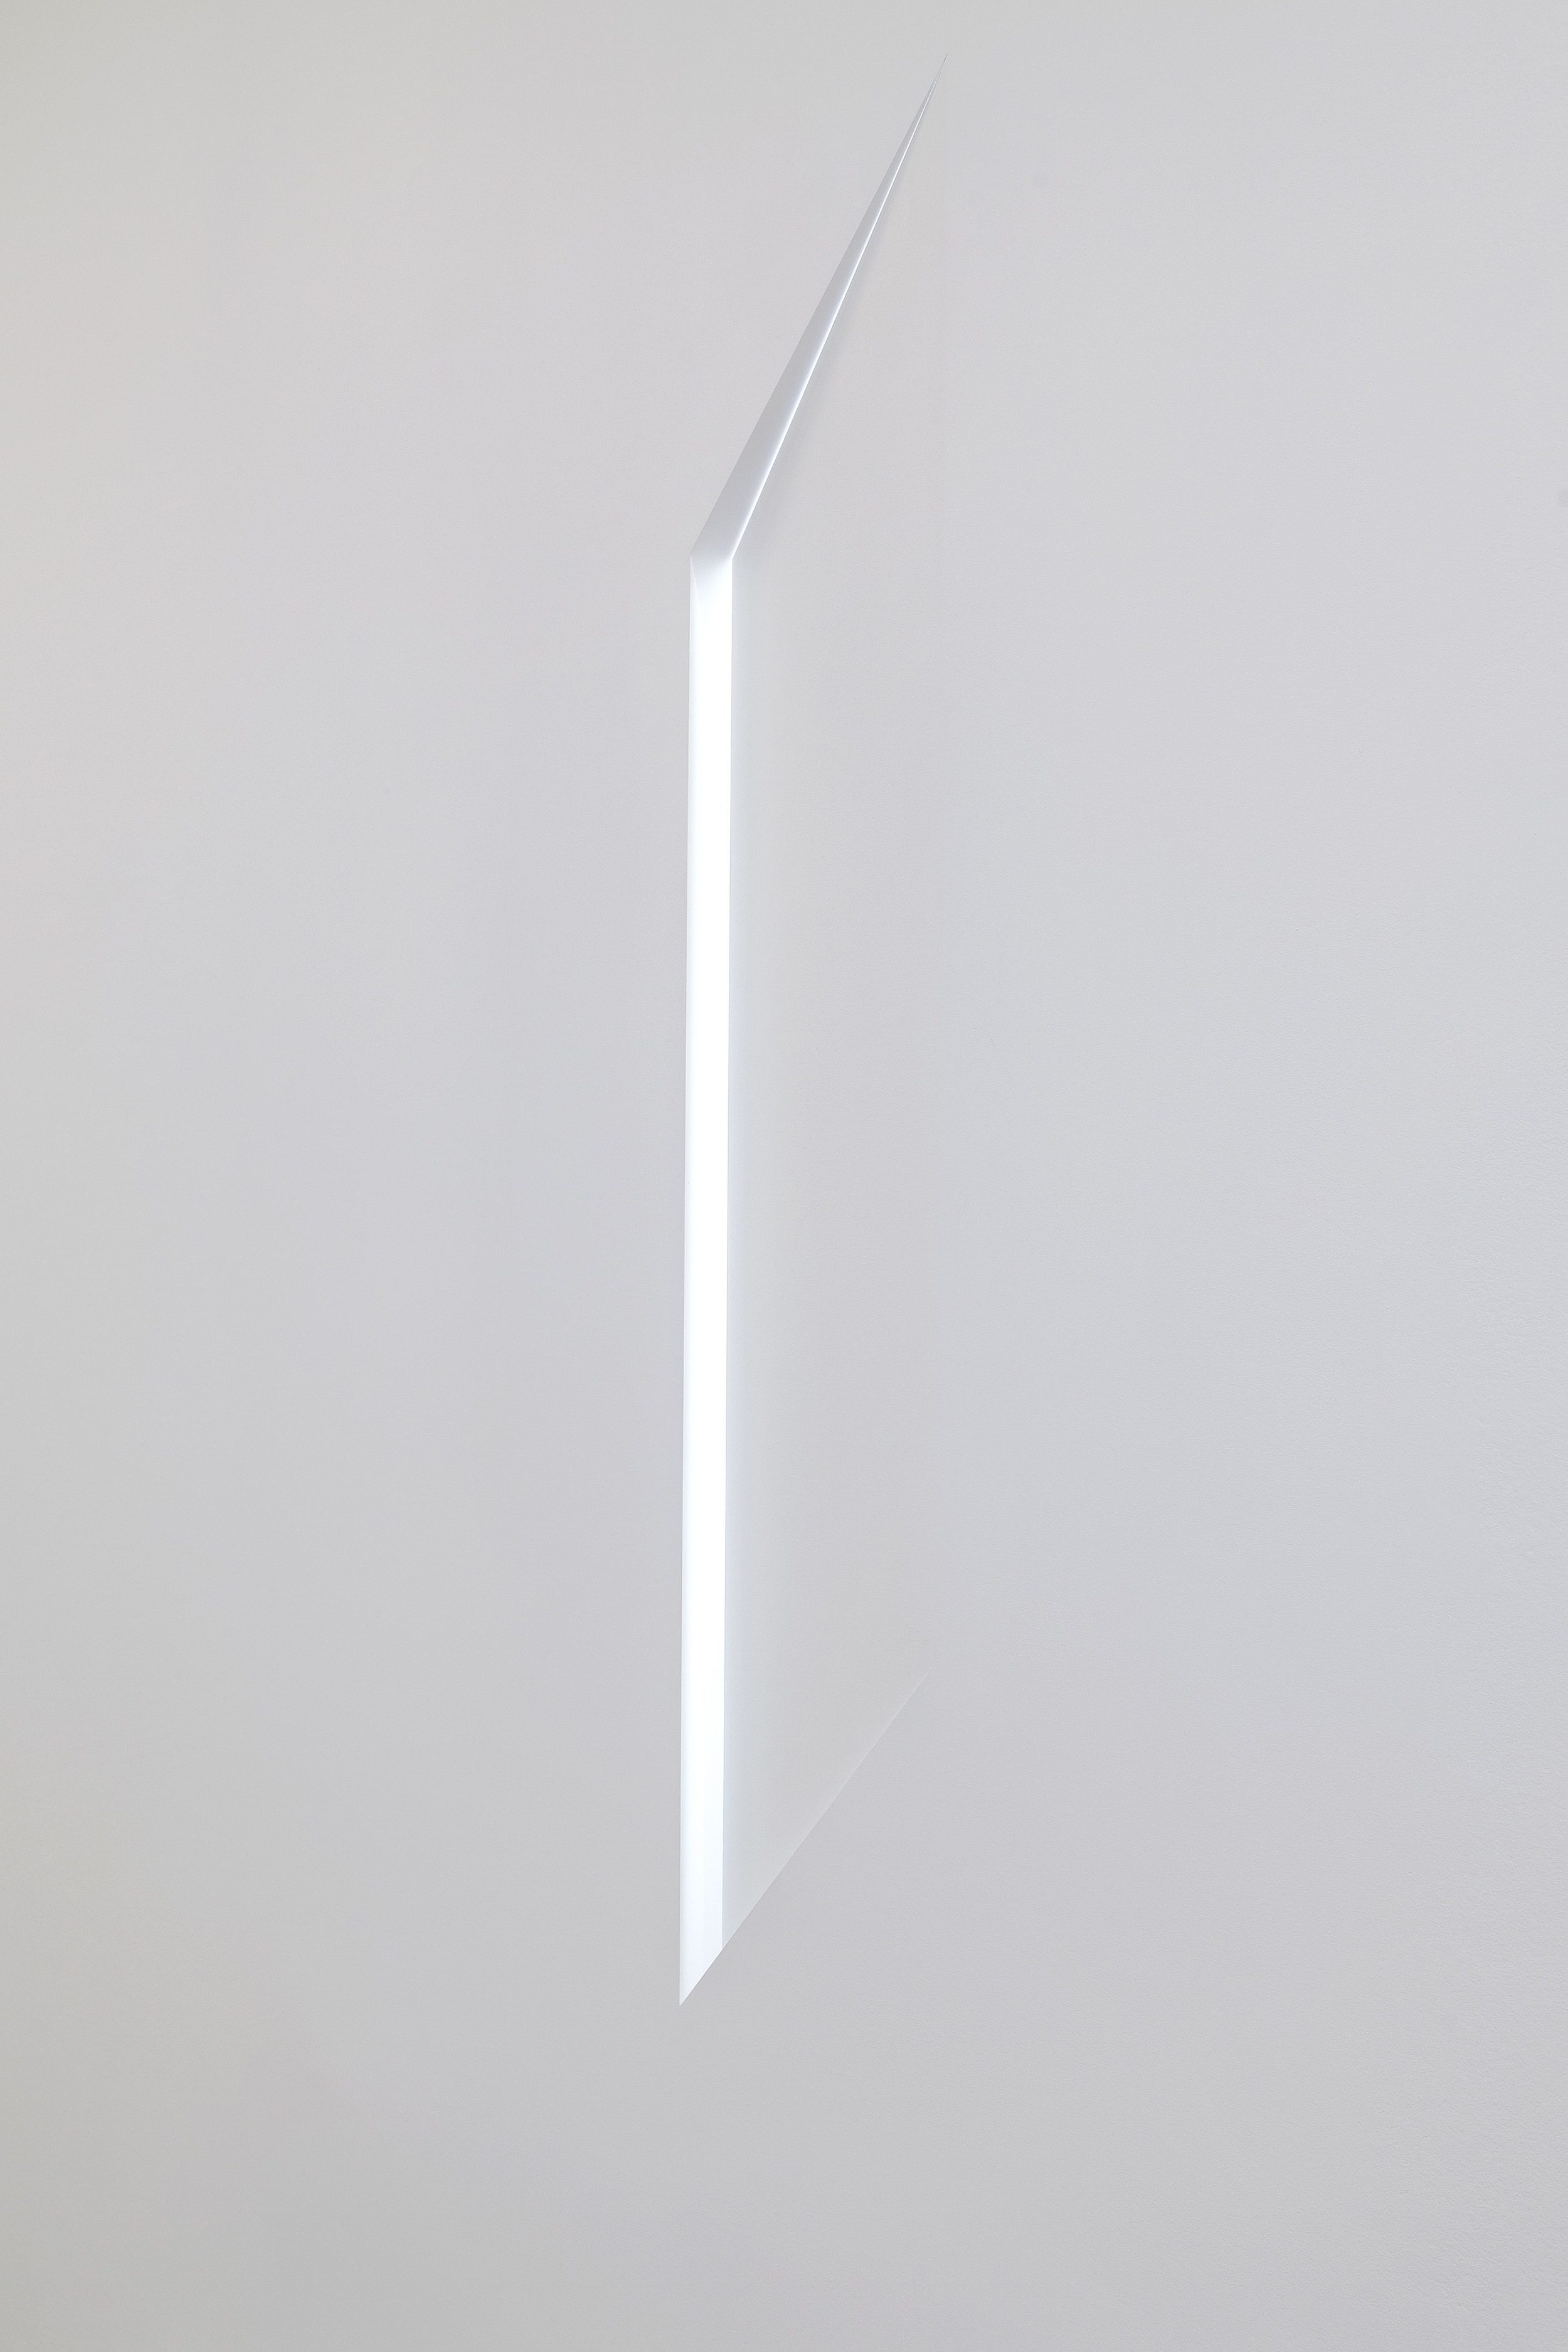  Disclosed Light. Installation constructed into existing wall, revealing and bringing the daylight from a hidden window behind the wall into the galleryspace. 